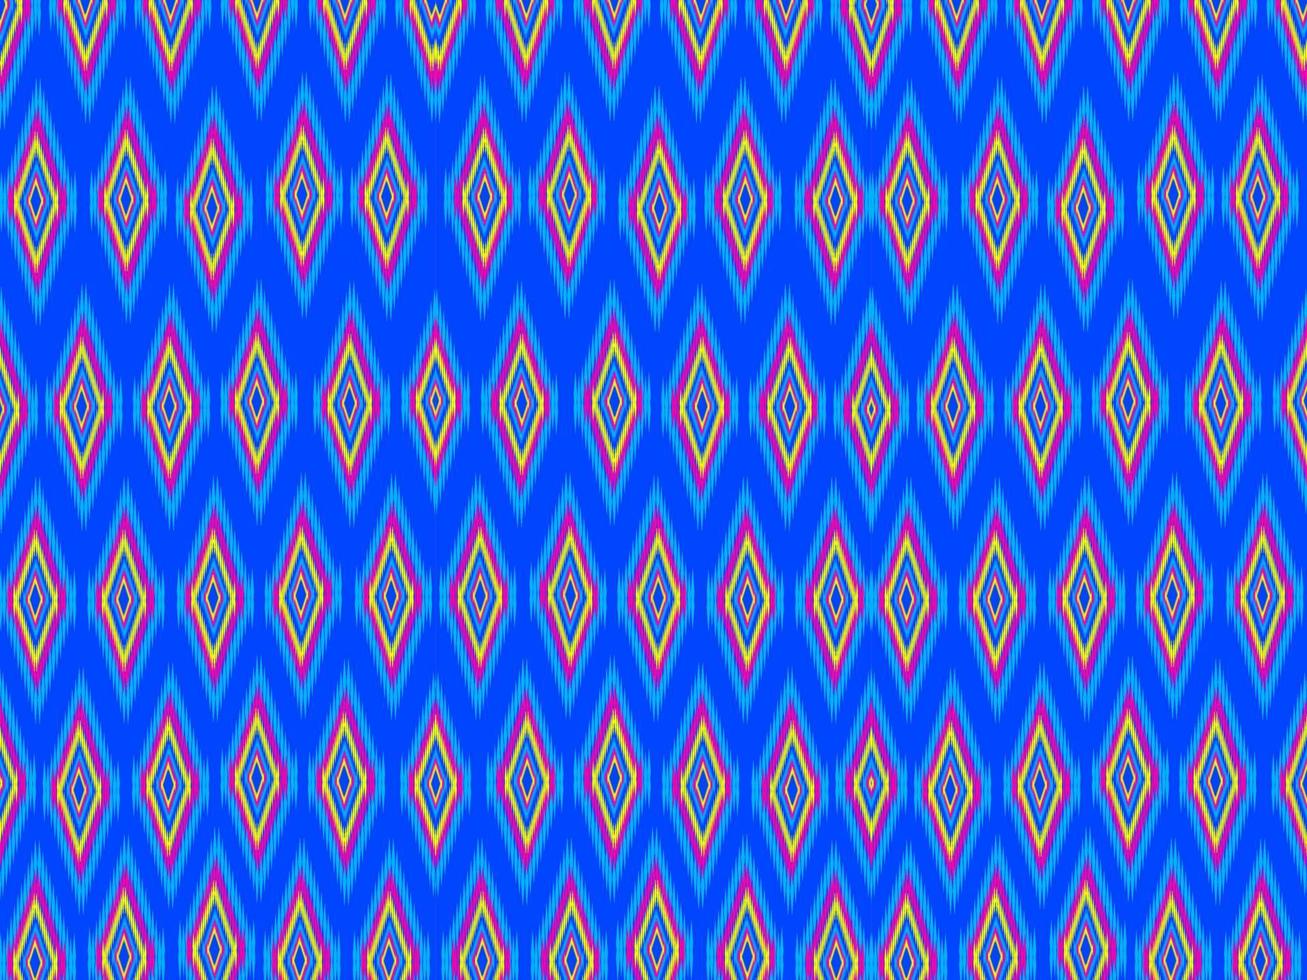 Traditional geometric ethnic embroidered ikat fabric pattern vector